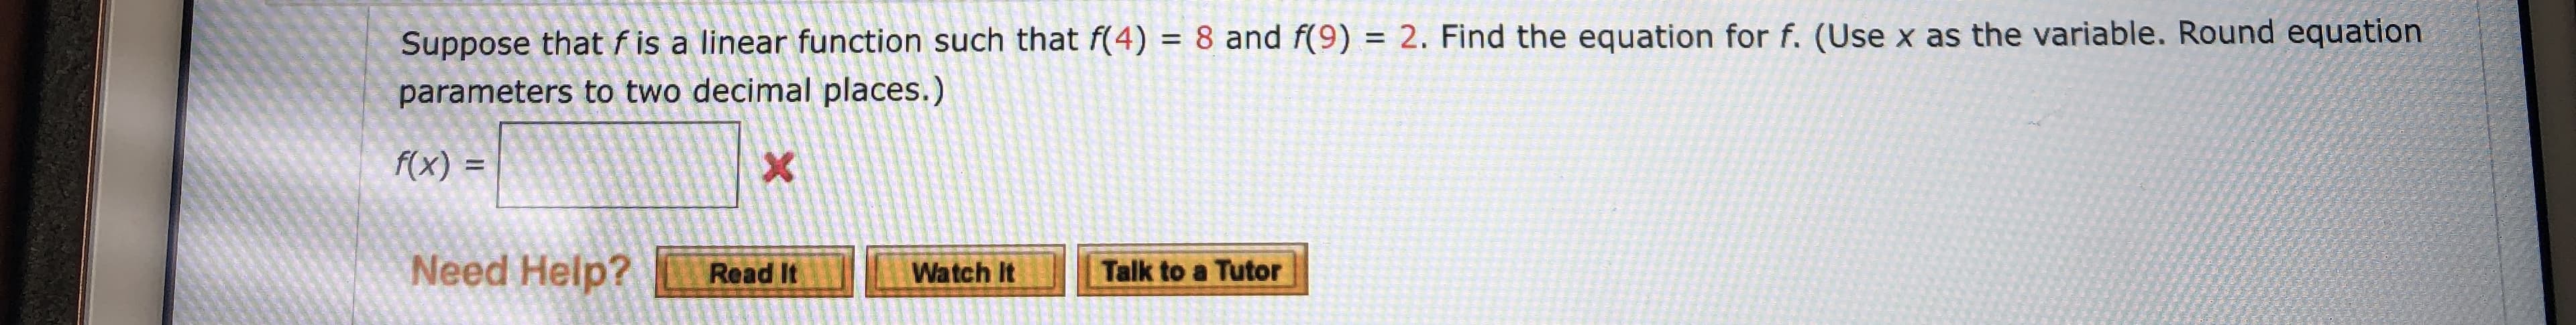 Suppose that f is a linear function such that f(4) = 8 and f(9) = 2. Find the equation for f. (Use x as the variable. Round equation
parameters to two decimal places.)
f(x) =
X
Need Help?
Talk to a Tutor
Read It
Watch It
